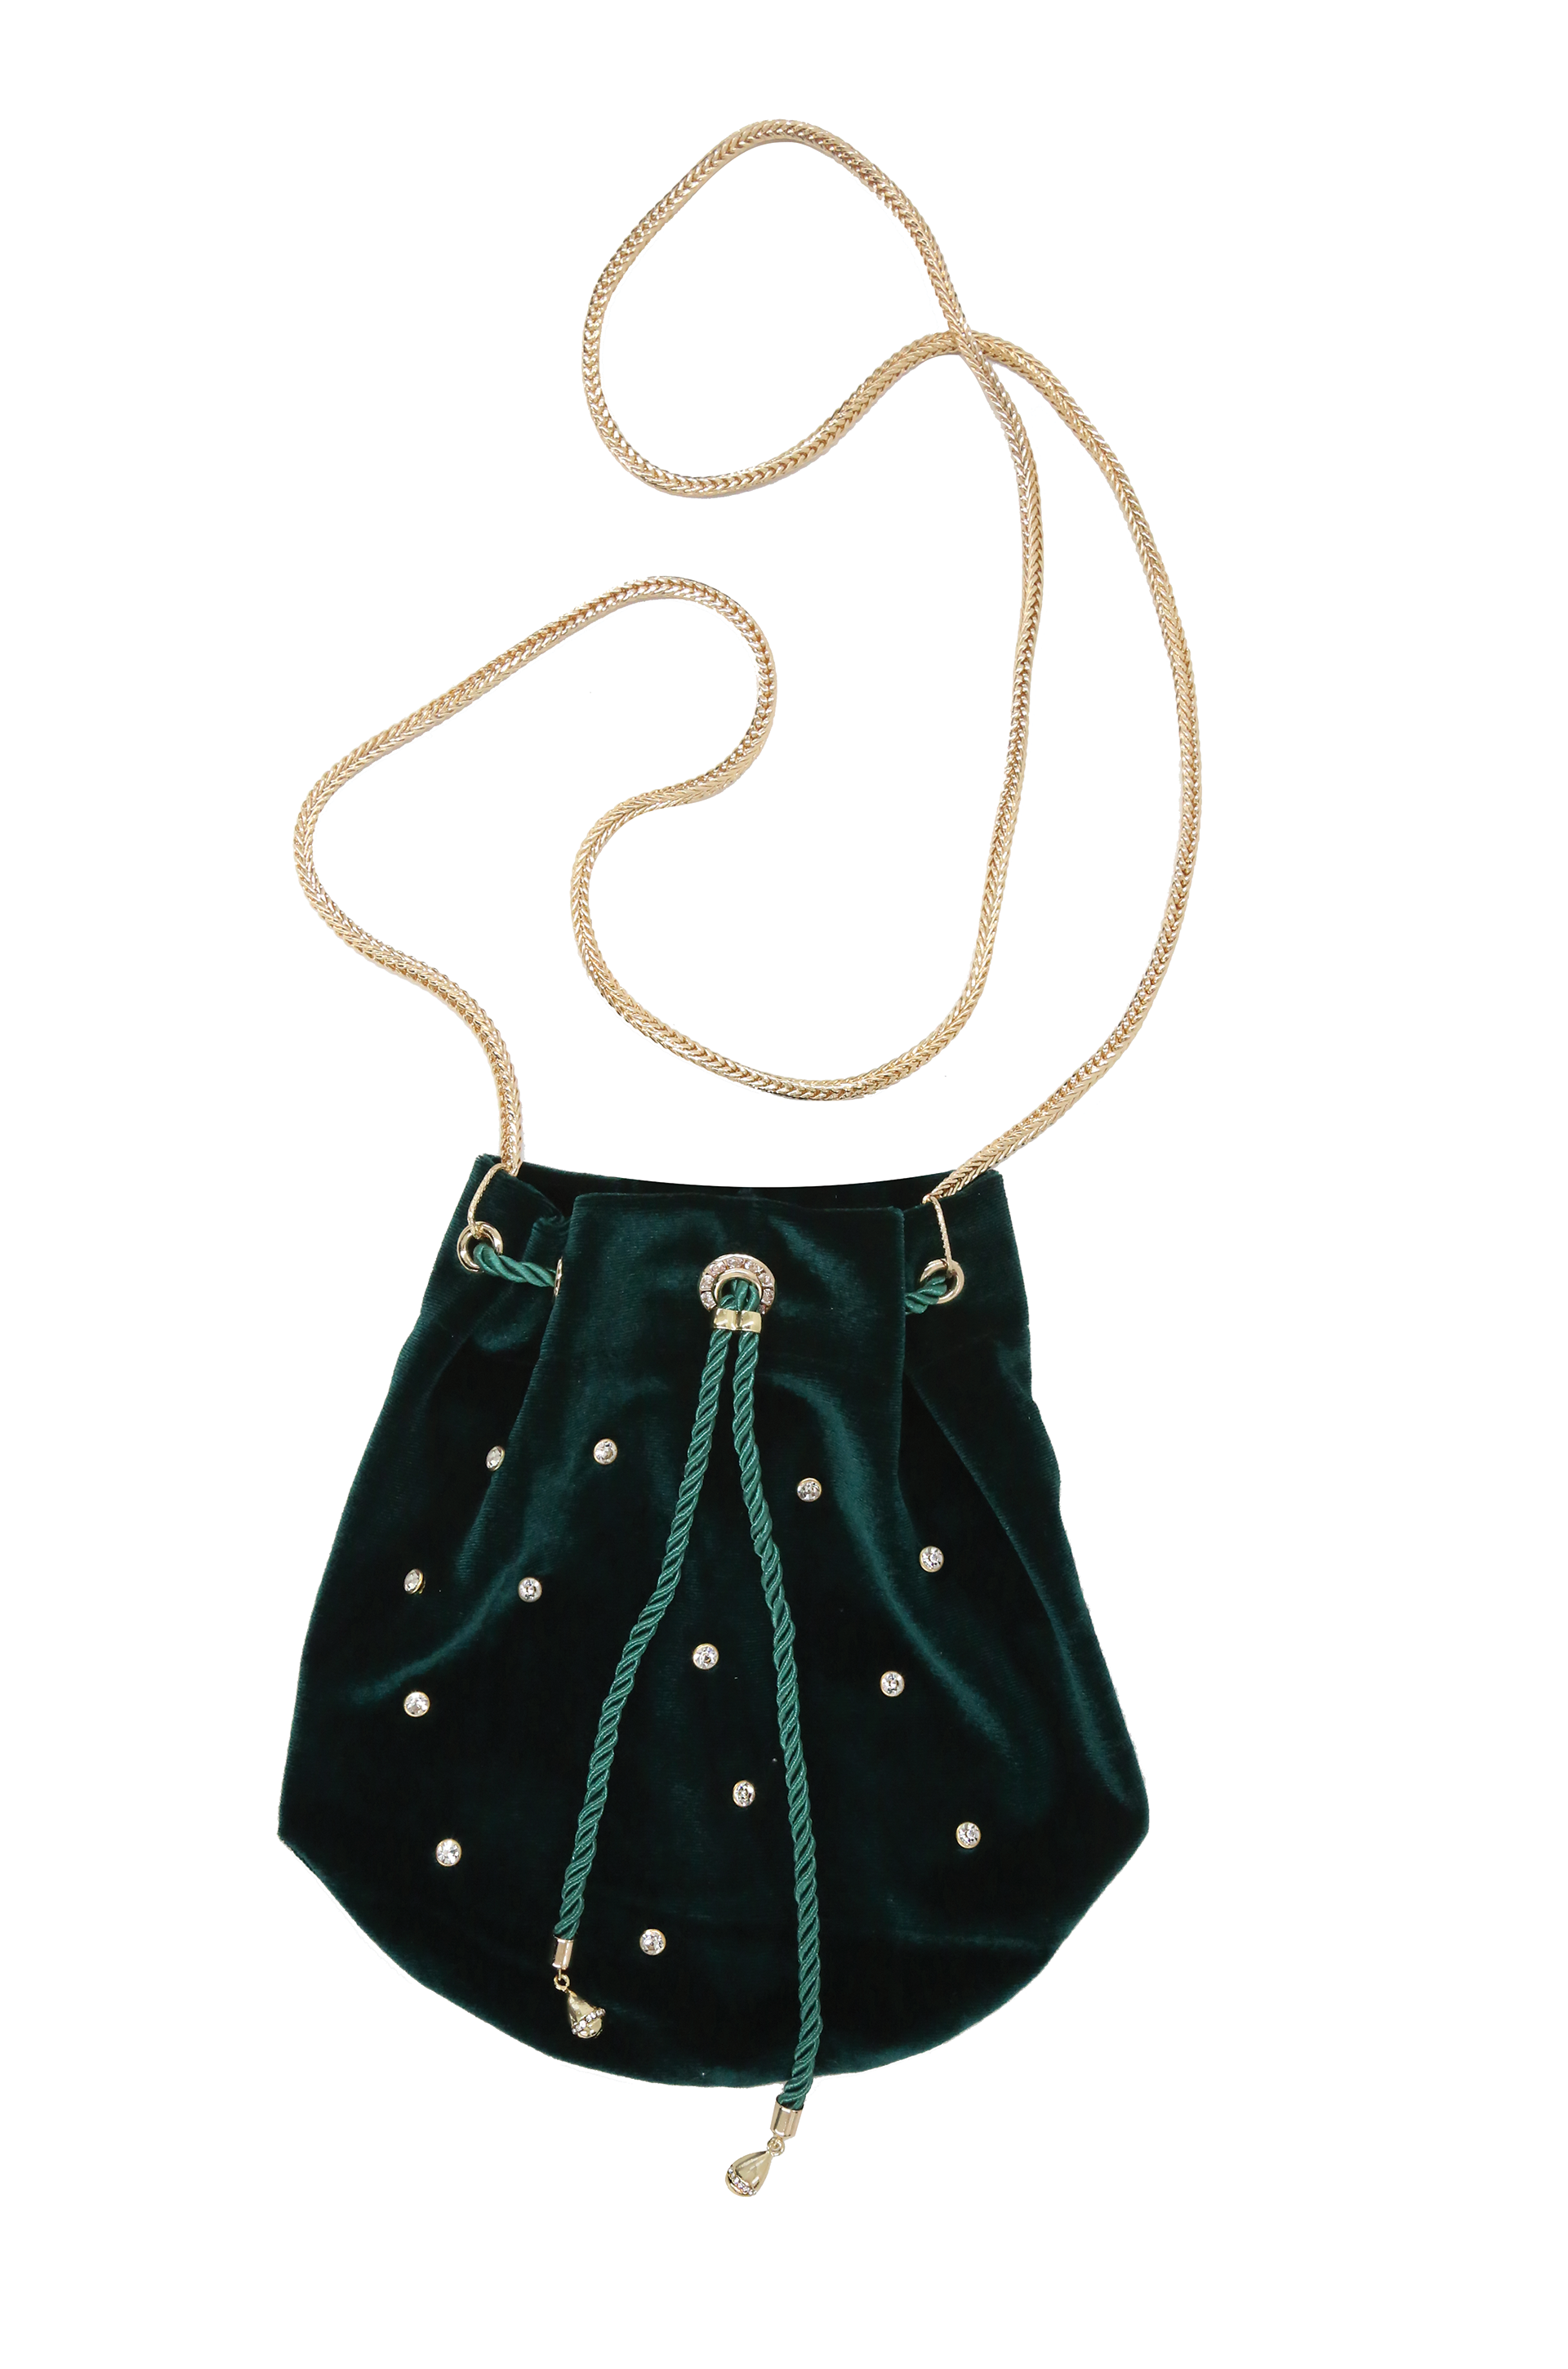 Emerald Velvet Compact Bucket Bag with Gold Chain on white